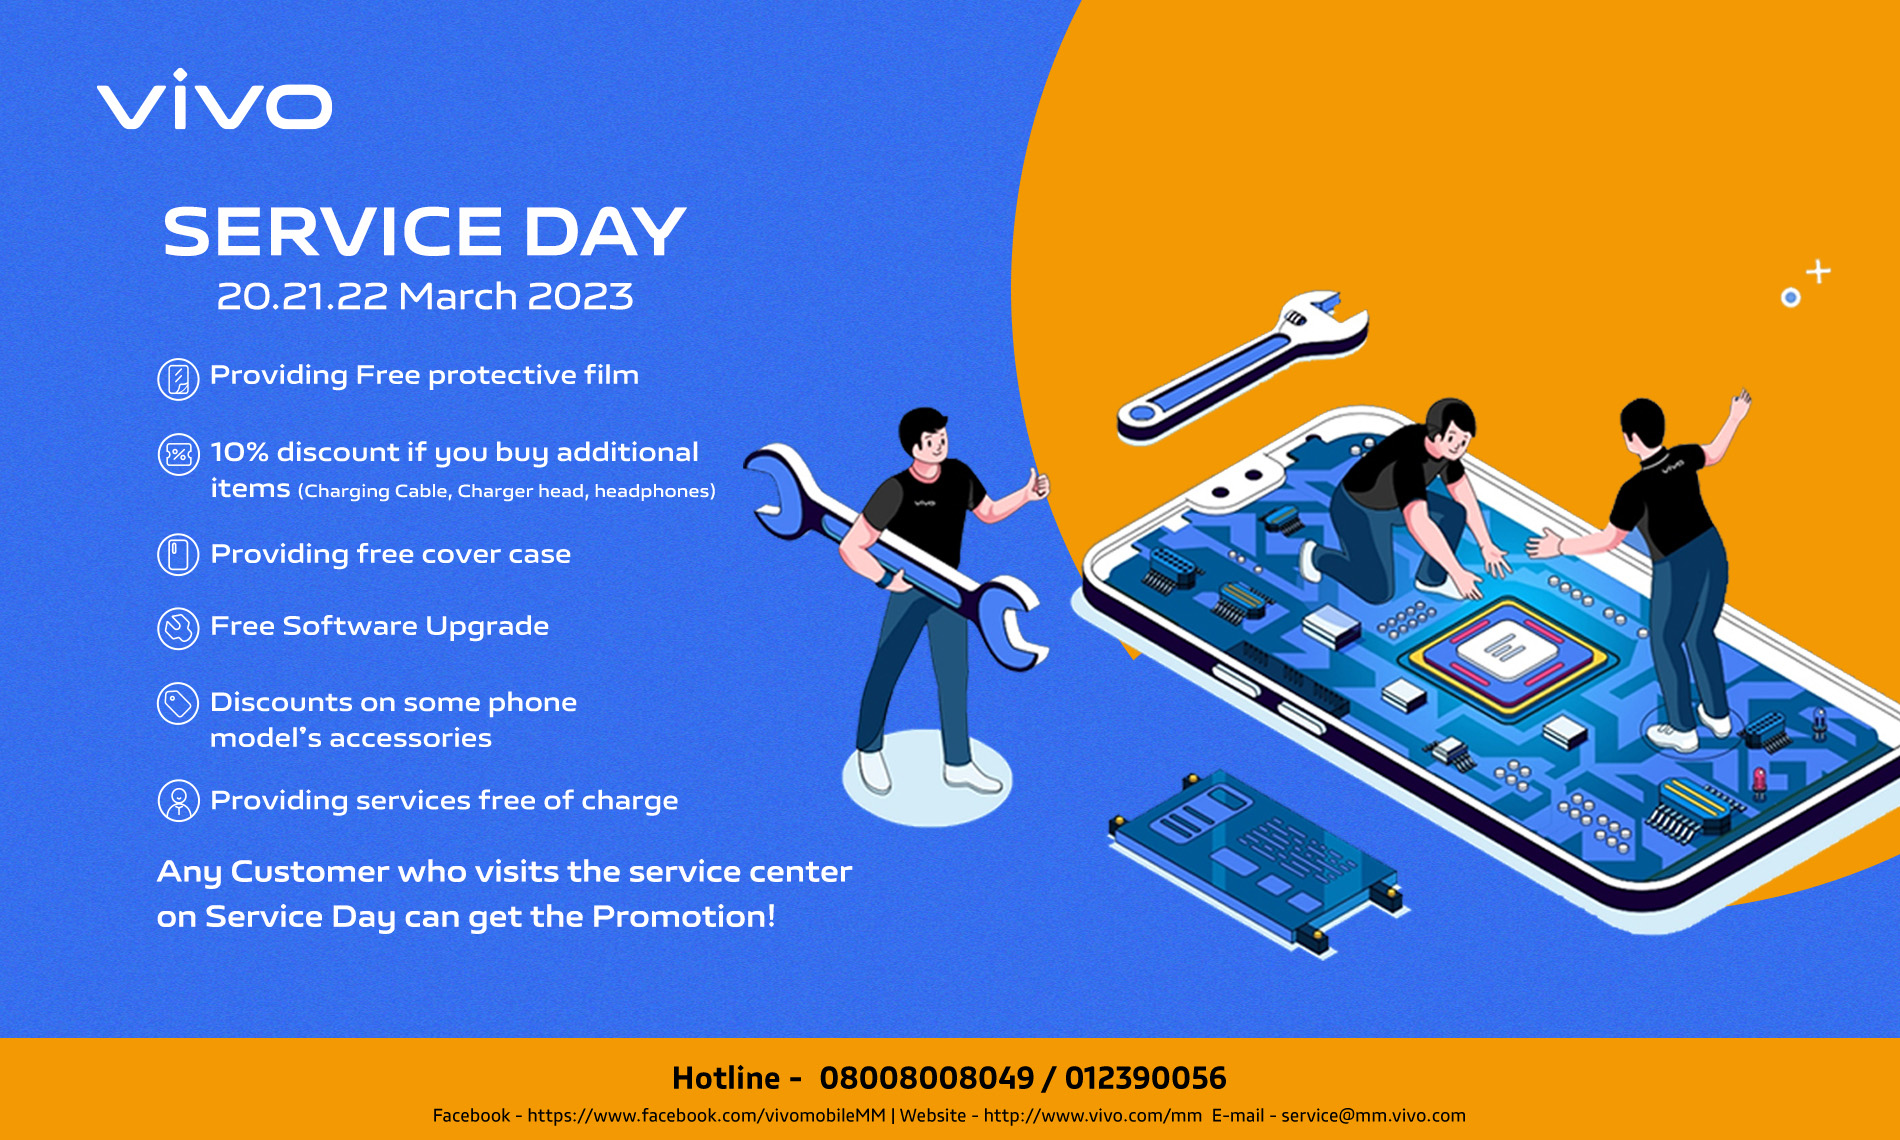 vivo Service Day Benefits in March